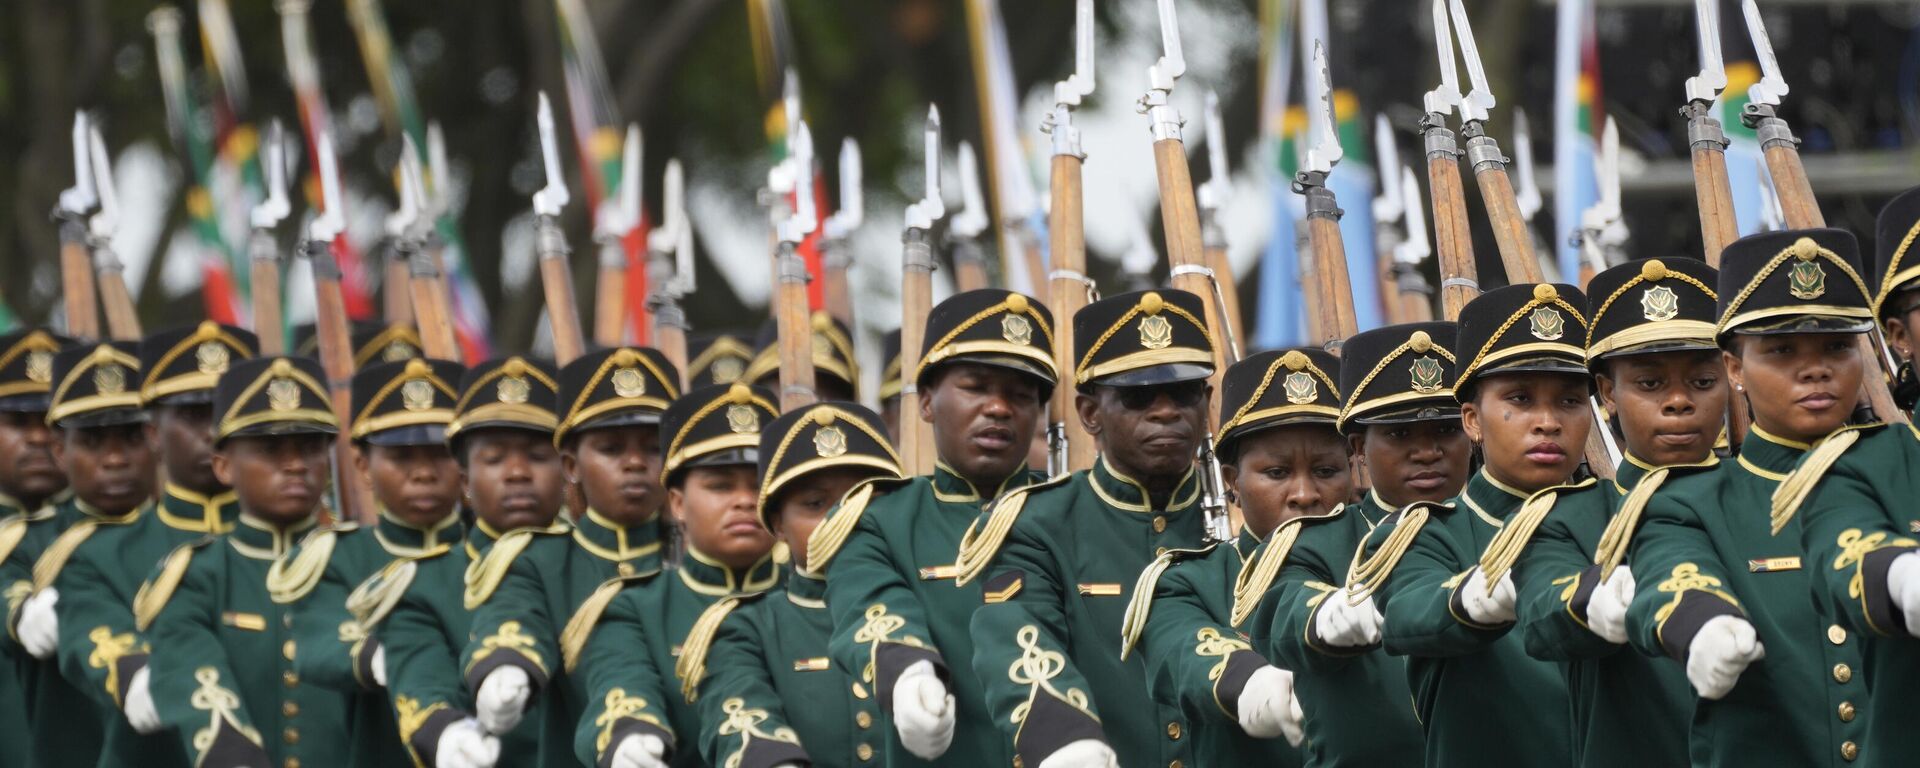 Members of the presidential guard march during an Armed Forces Day in Richards Bay, South Africa, Tuesday, Feb. 21, 2023. The parade took place as a naval exercise was underway off the east coast of the country with Russian and Chinese navies.  - Sputnik International, 1920, 22.02.2023